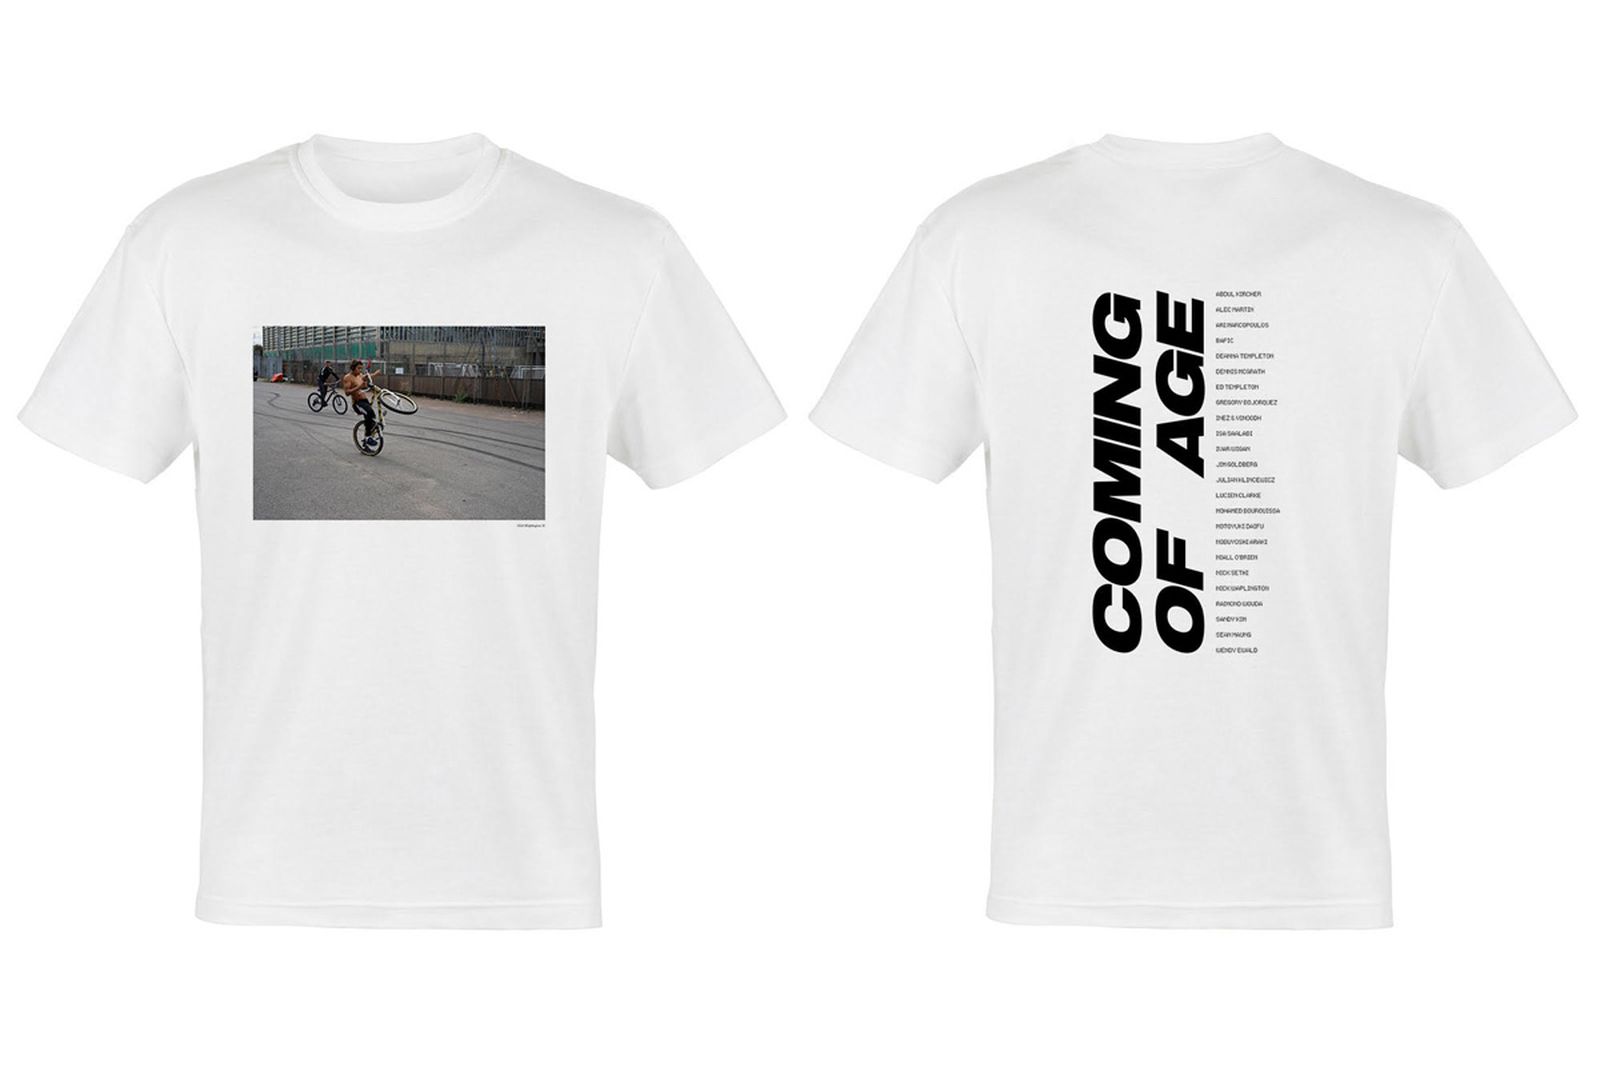 Cop Exclusive T-Shirts From Virgil Abloh's 